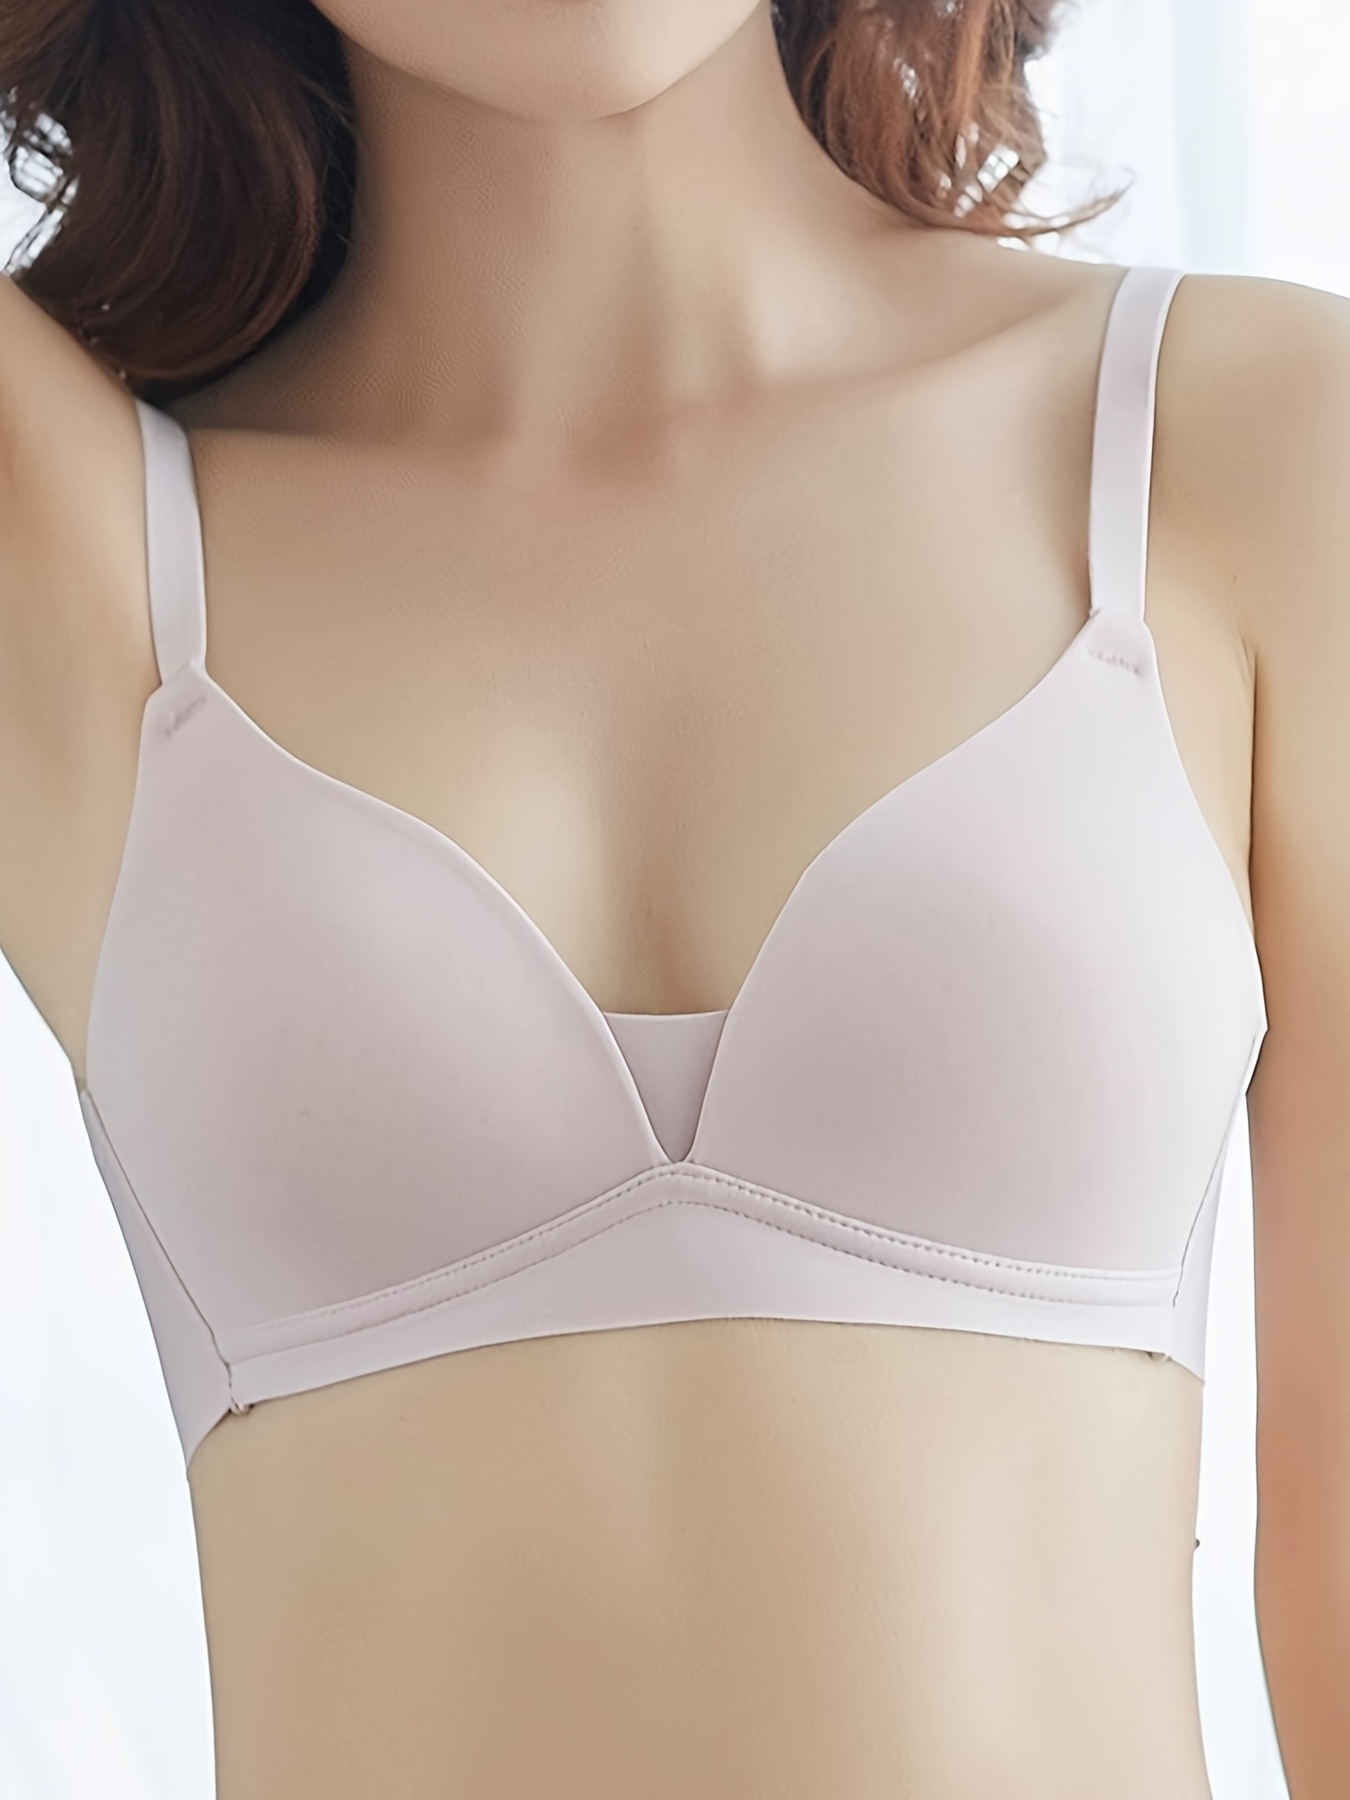 No Steel Ring Bra for Women Soft Comfort Wireless Underwear Female's Bra Breathable  Gathered Thin Lingerie Beauty Back Support, Beyondshoping